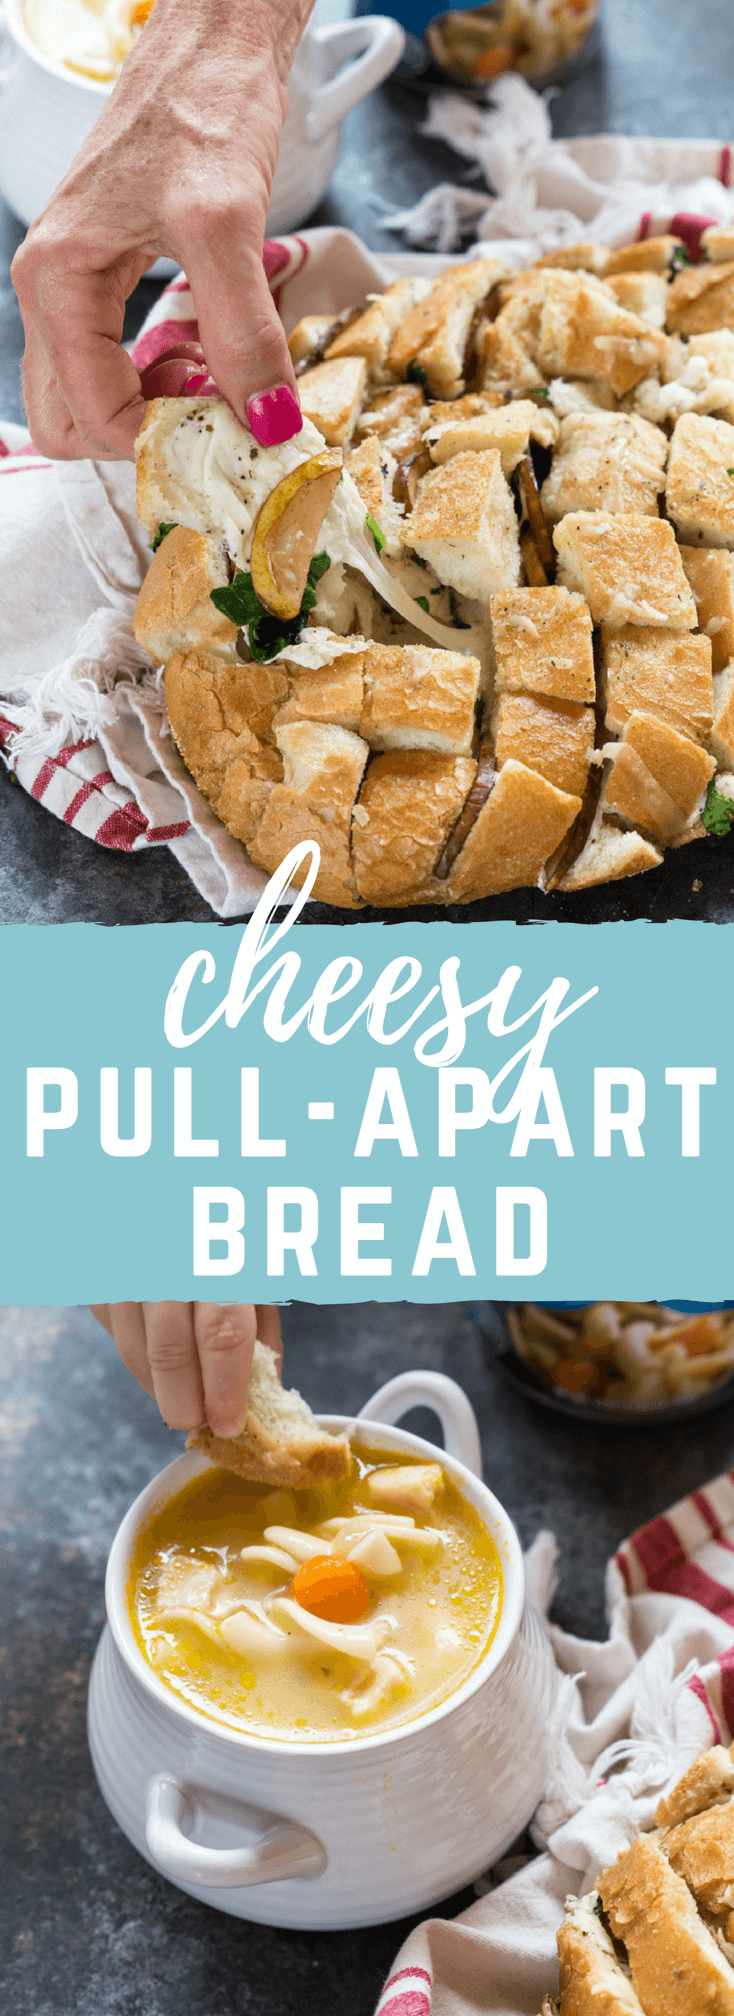 This Cheesy Pull Apart Bread will serve a crowd or simply scale the recipe down for one or two. It's easy to make and tastes delicious with soup!